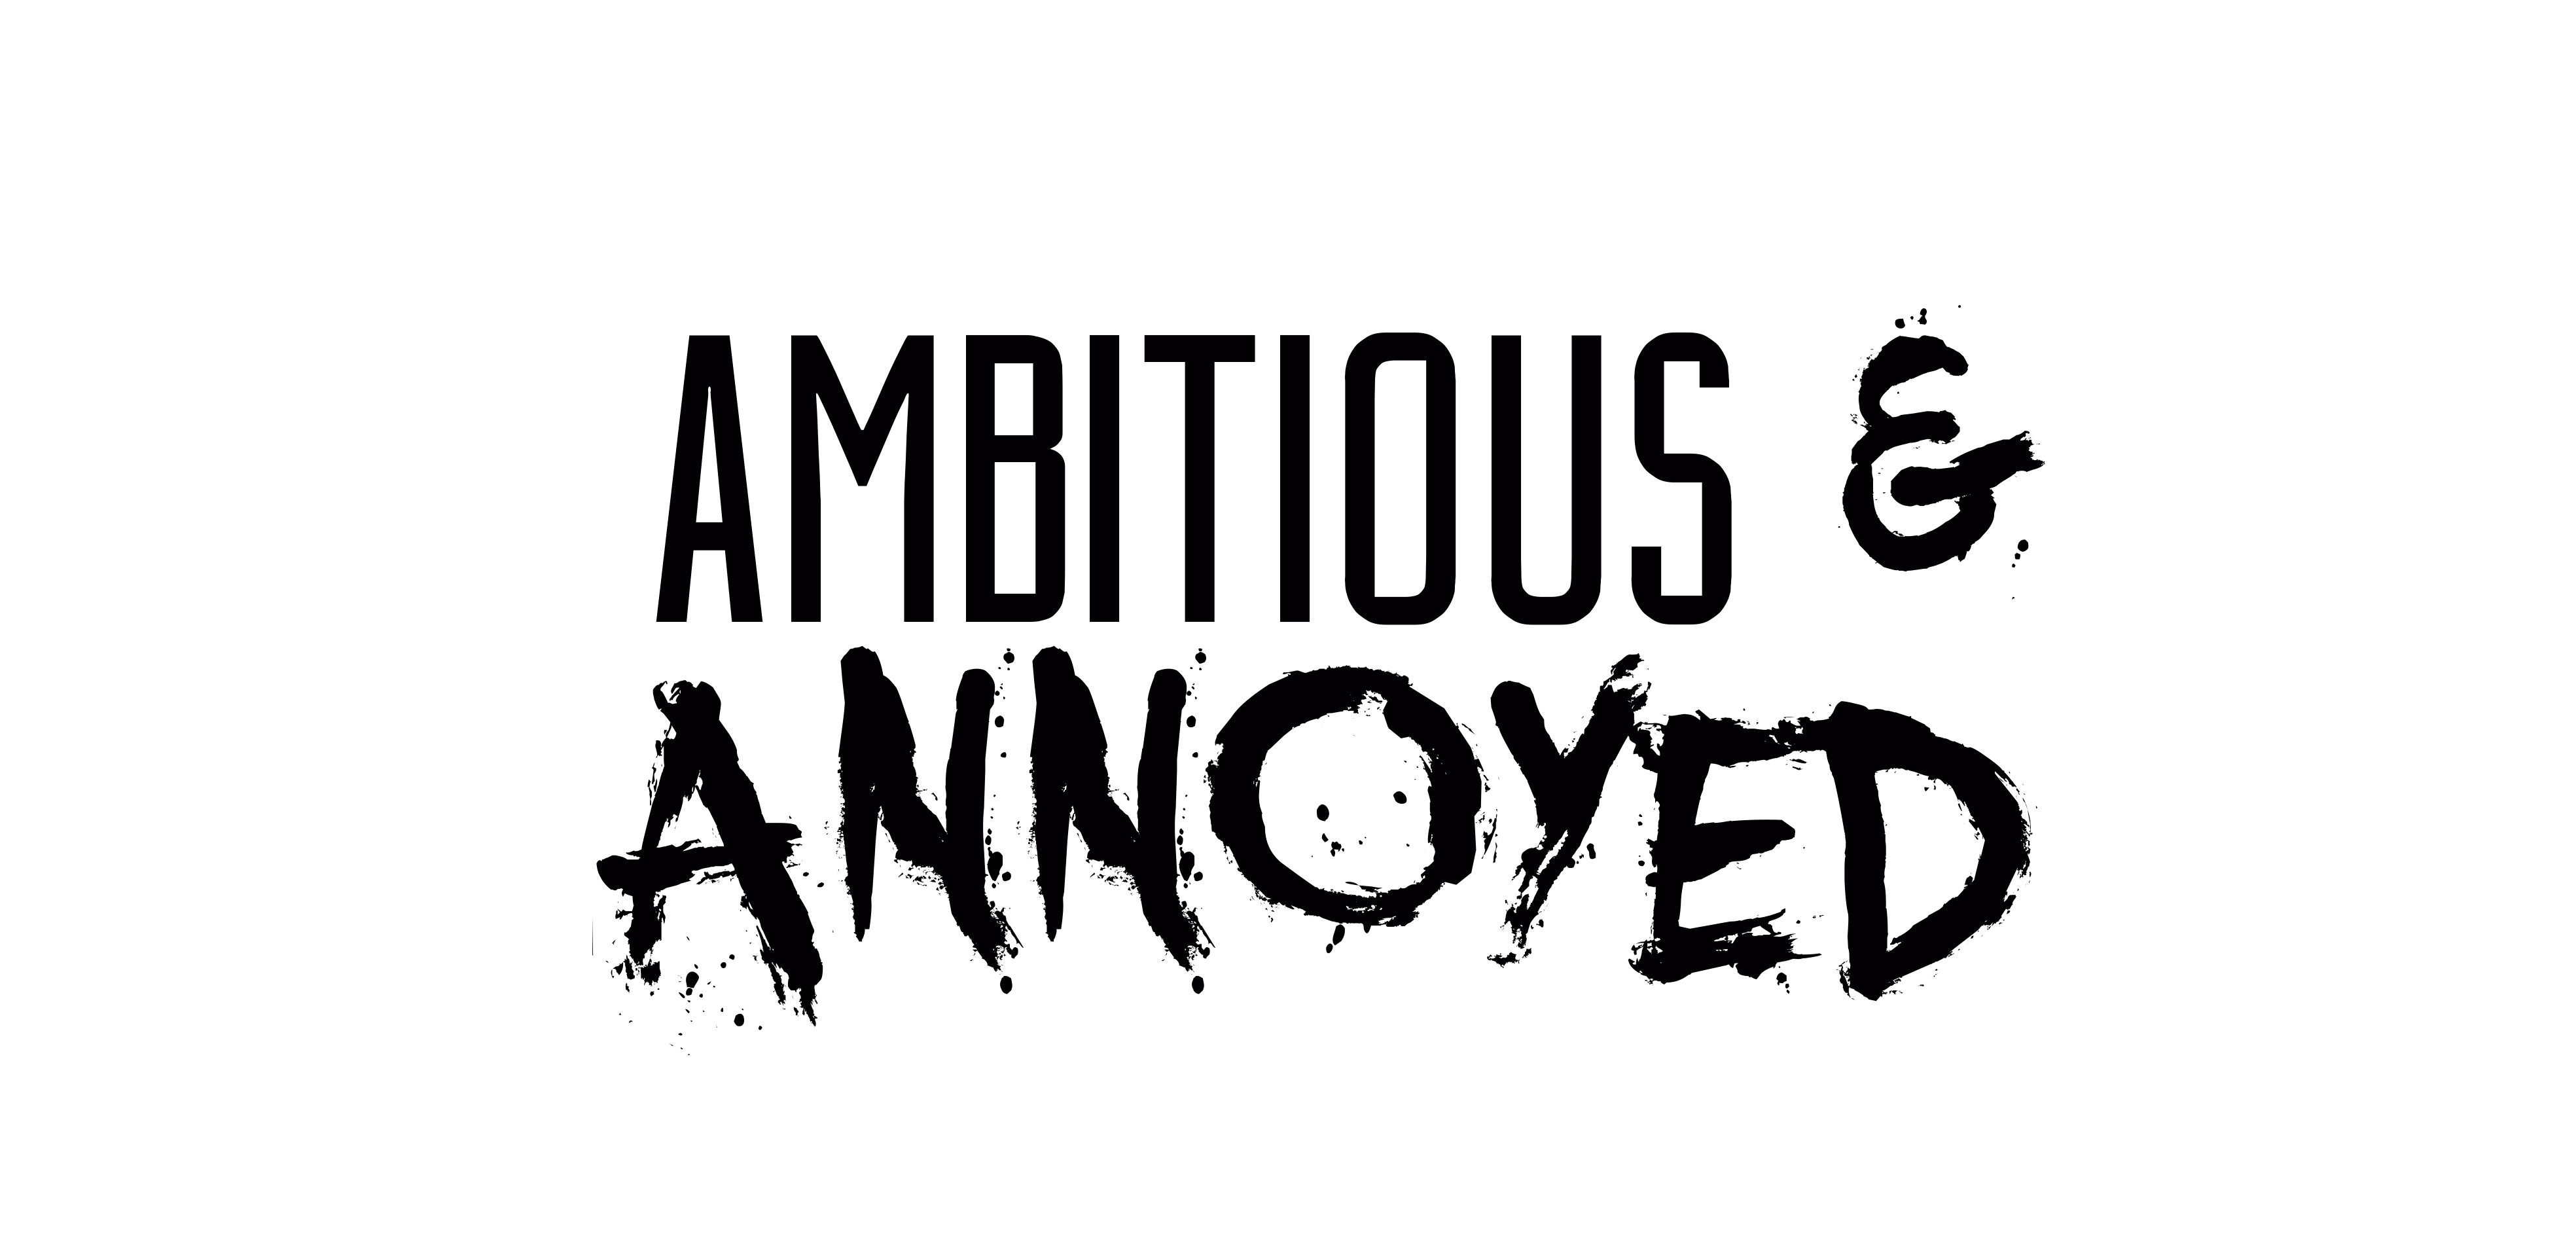 Ambitious Logo - Ambitious & Annoyed | Turning Annoyances into Fuel for Your Ambitions